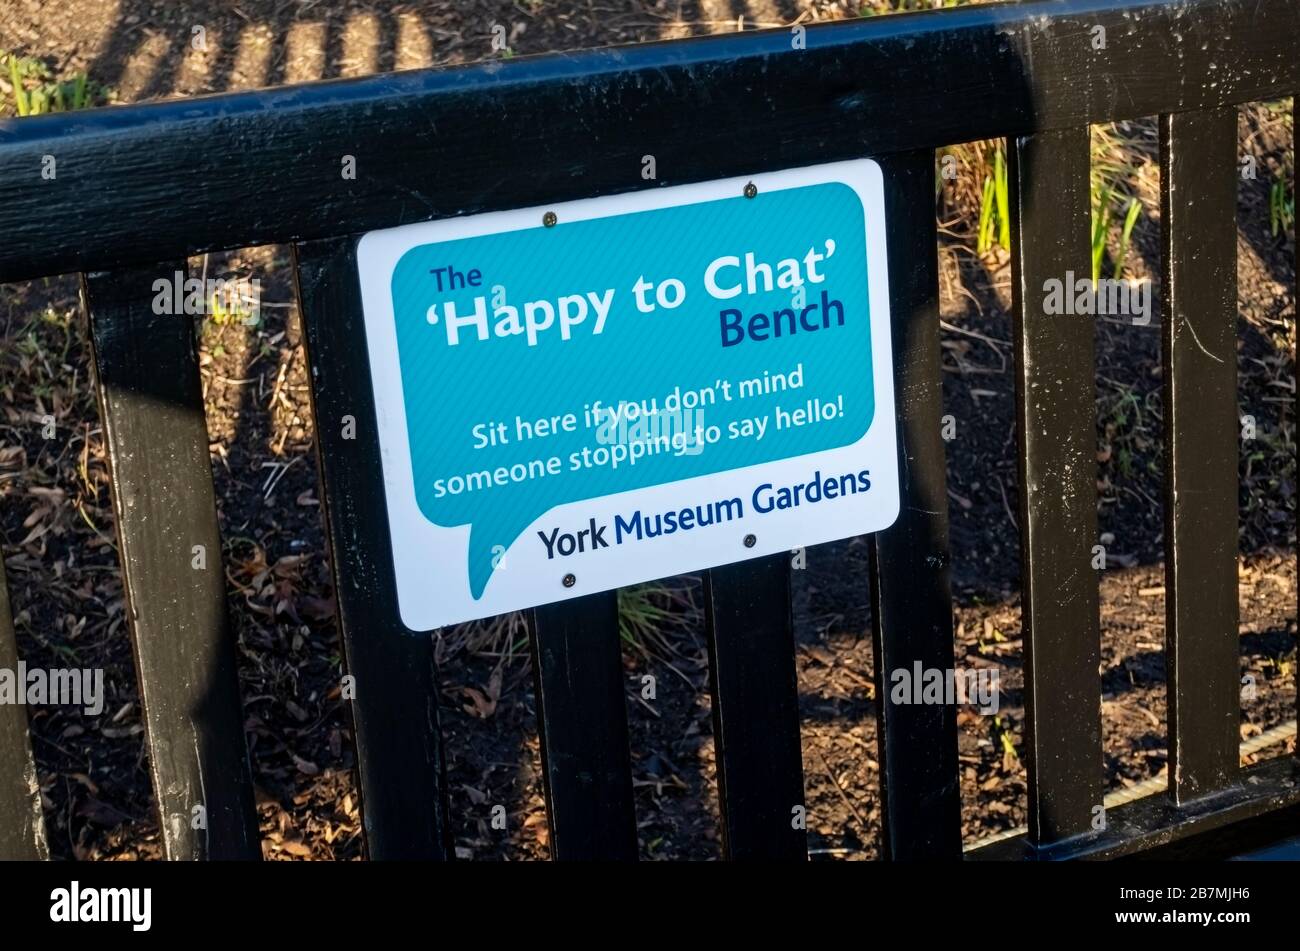 ‘Happy to chat’ bench to encourage social interaction Museum Gardens York North Yorkshire England UK United Kingdom GB Great Britain Stock Photo